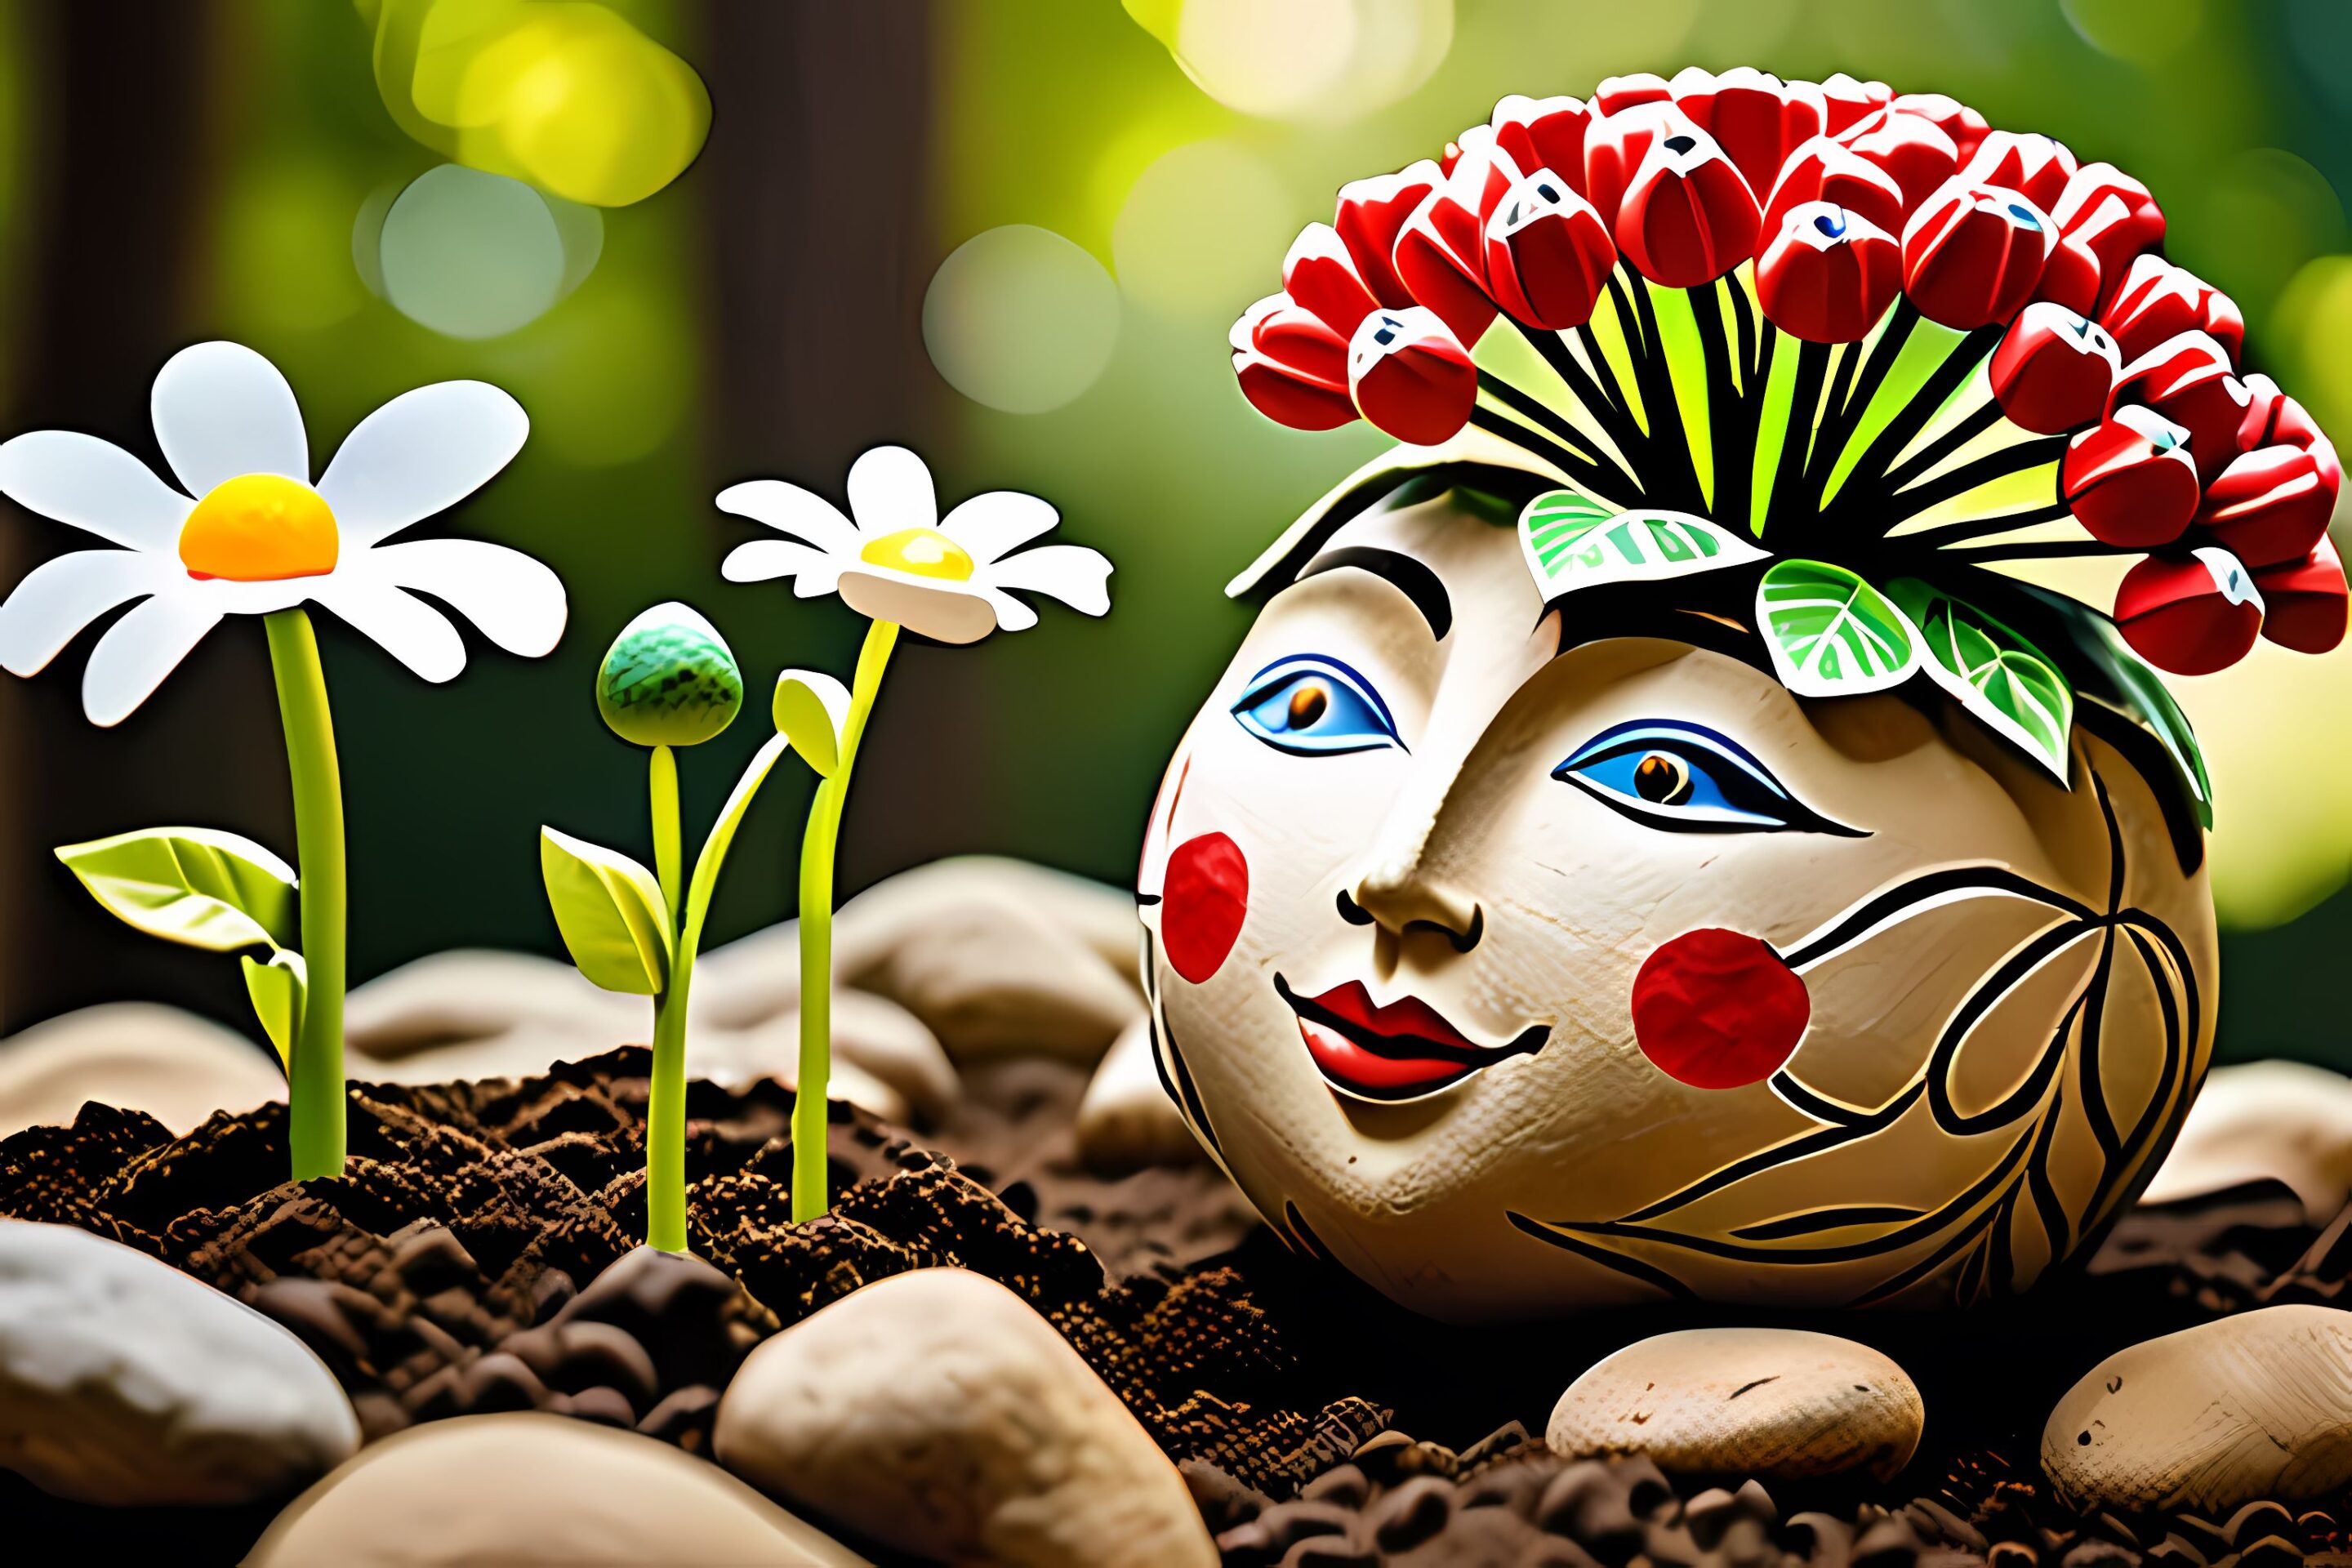 The Seed of Change: Cultivating Your Inner Garden